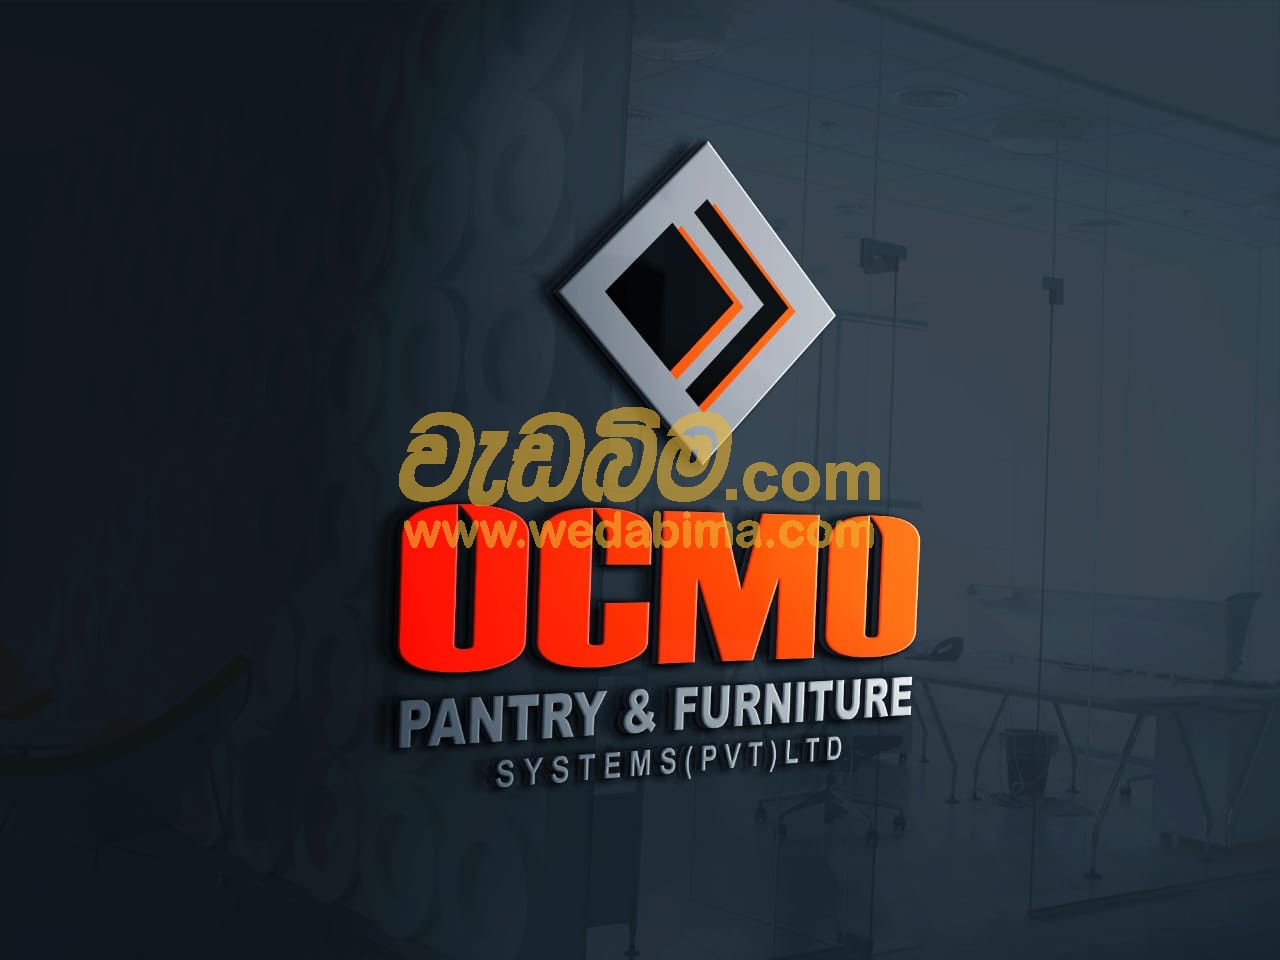 Ocmo Pantry & Furniture Systems